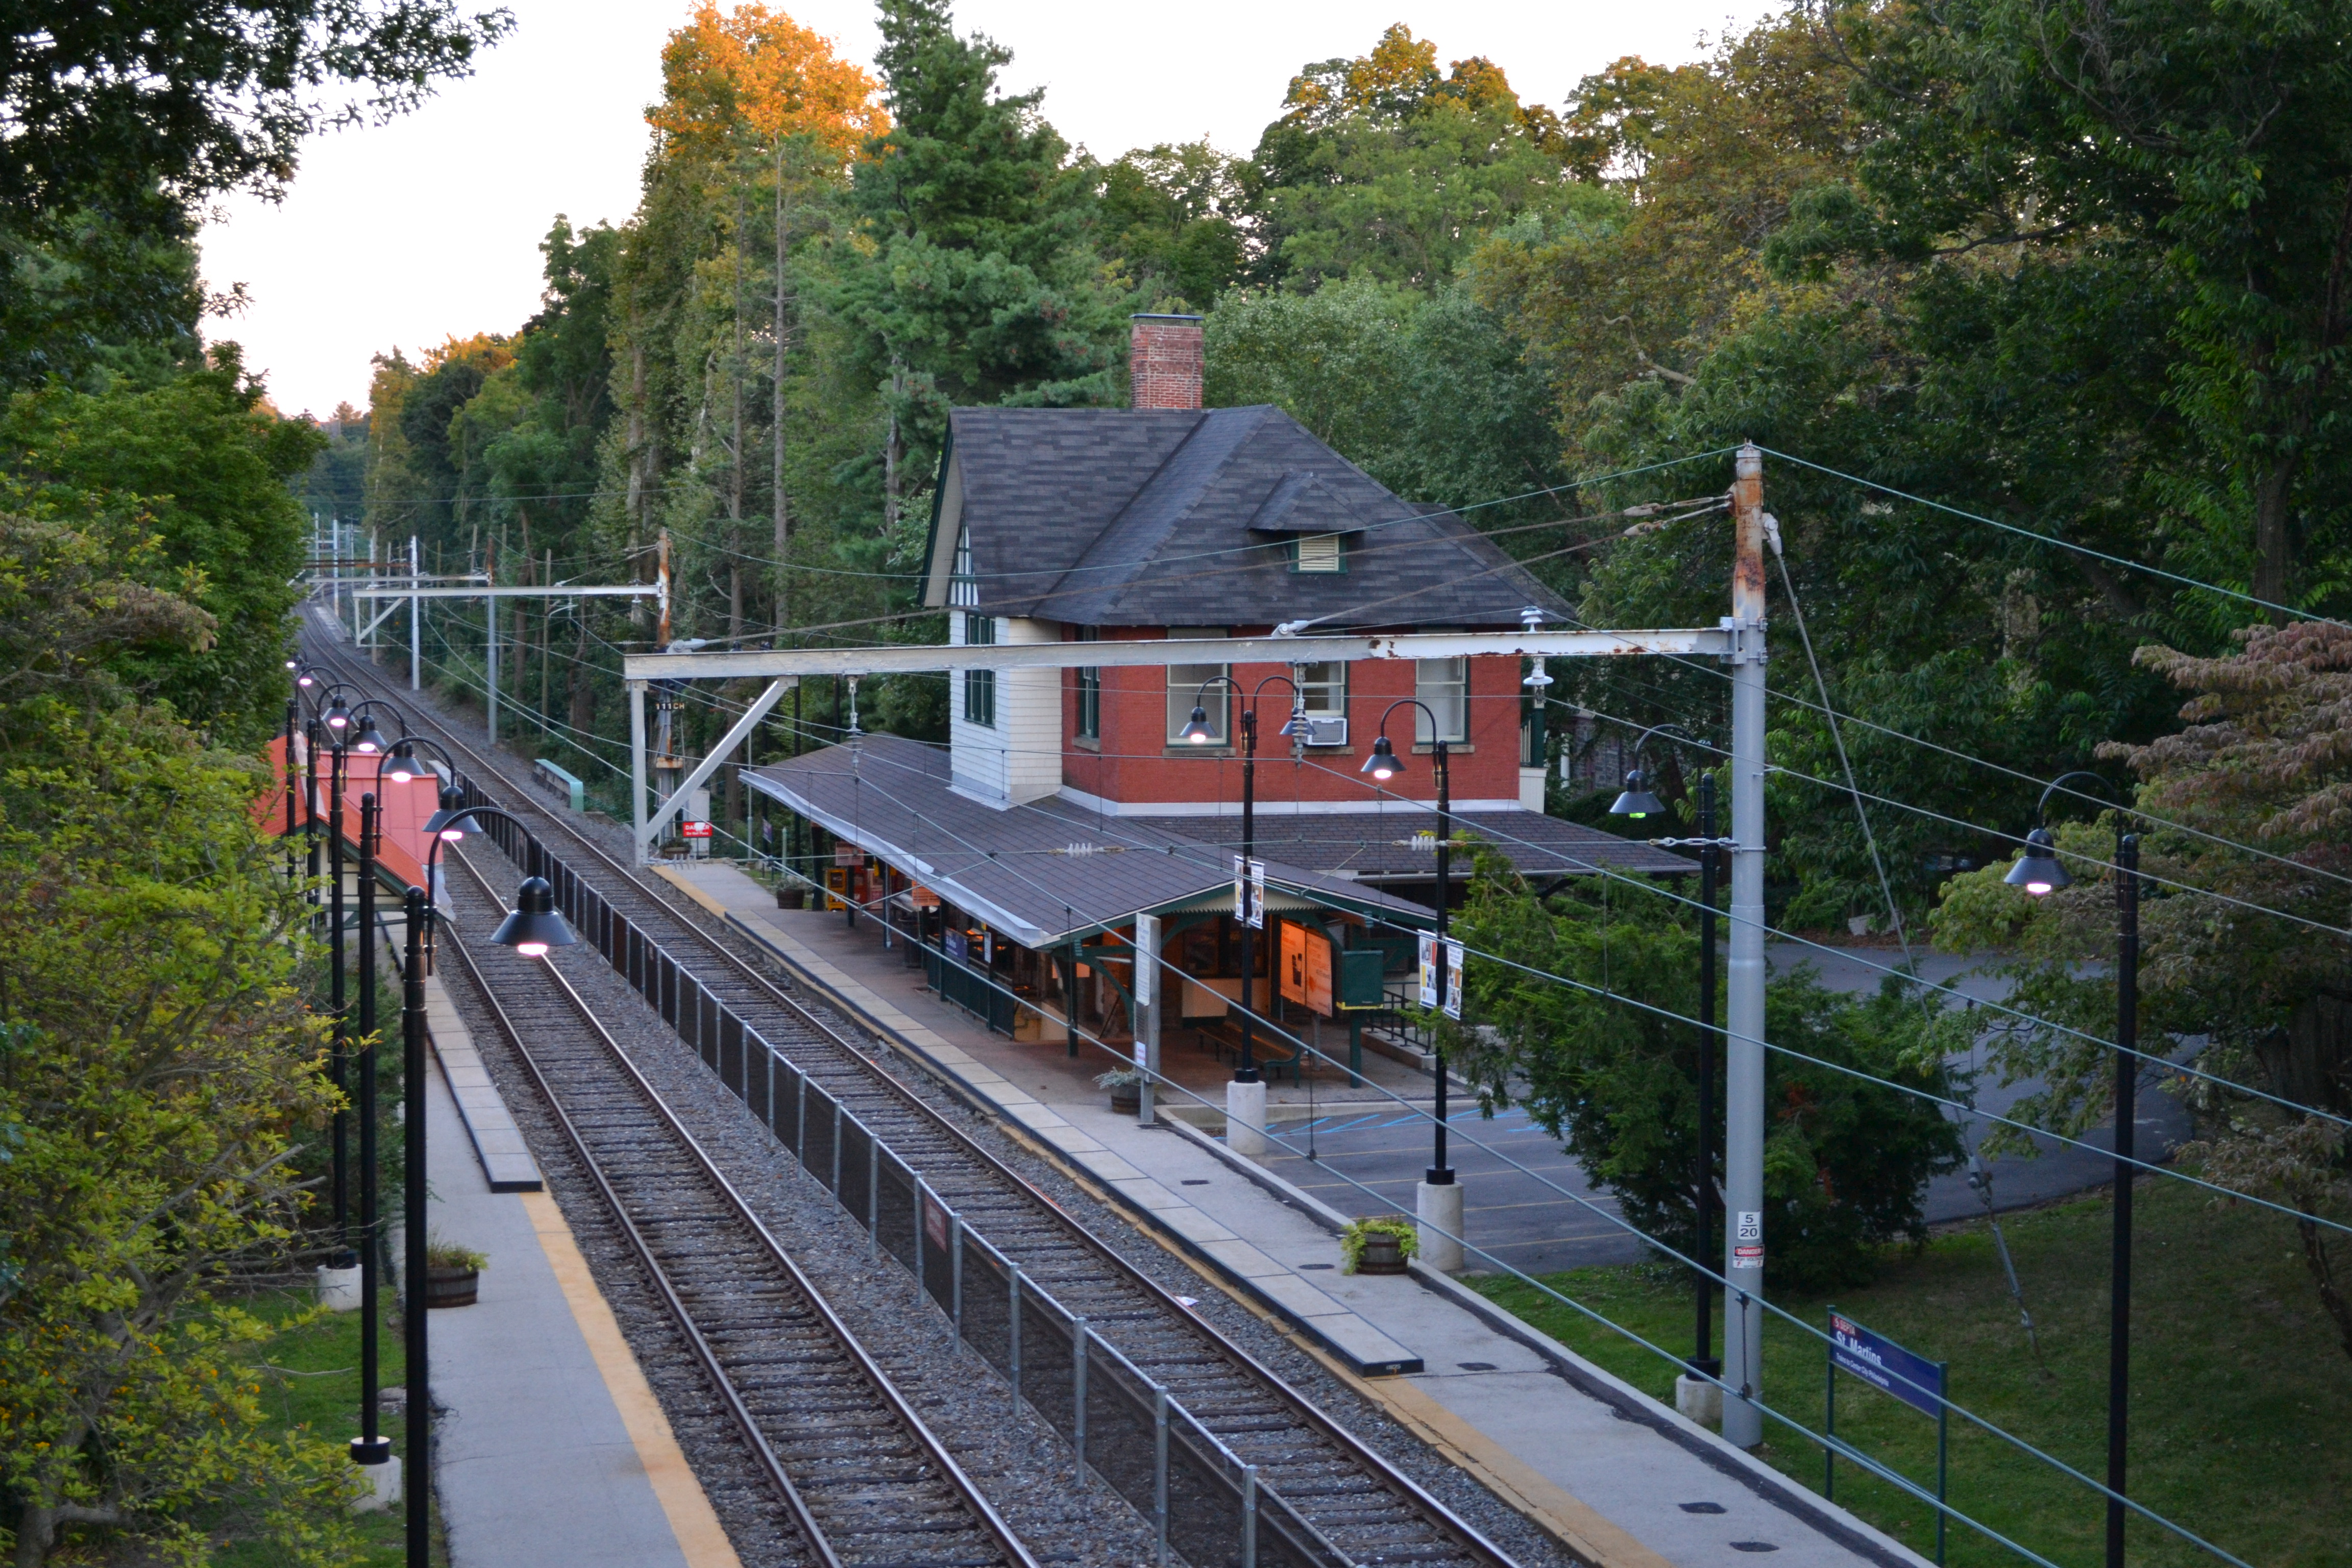 The new bridge will have design elements that match SEPTA's St. Martin Station